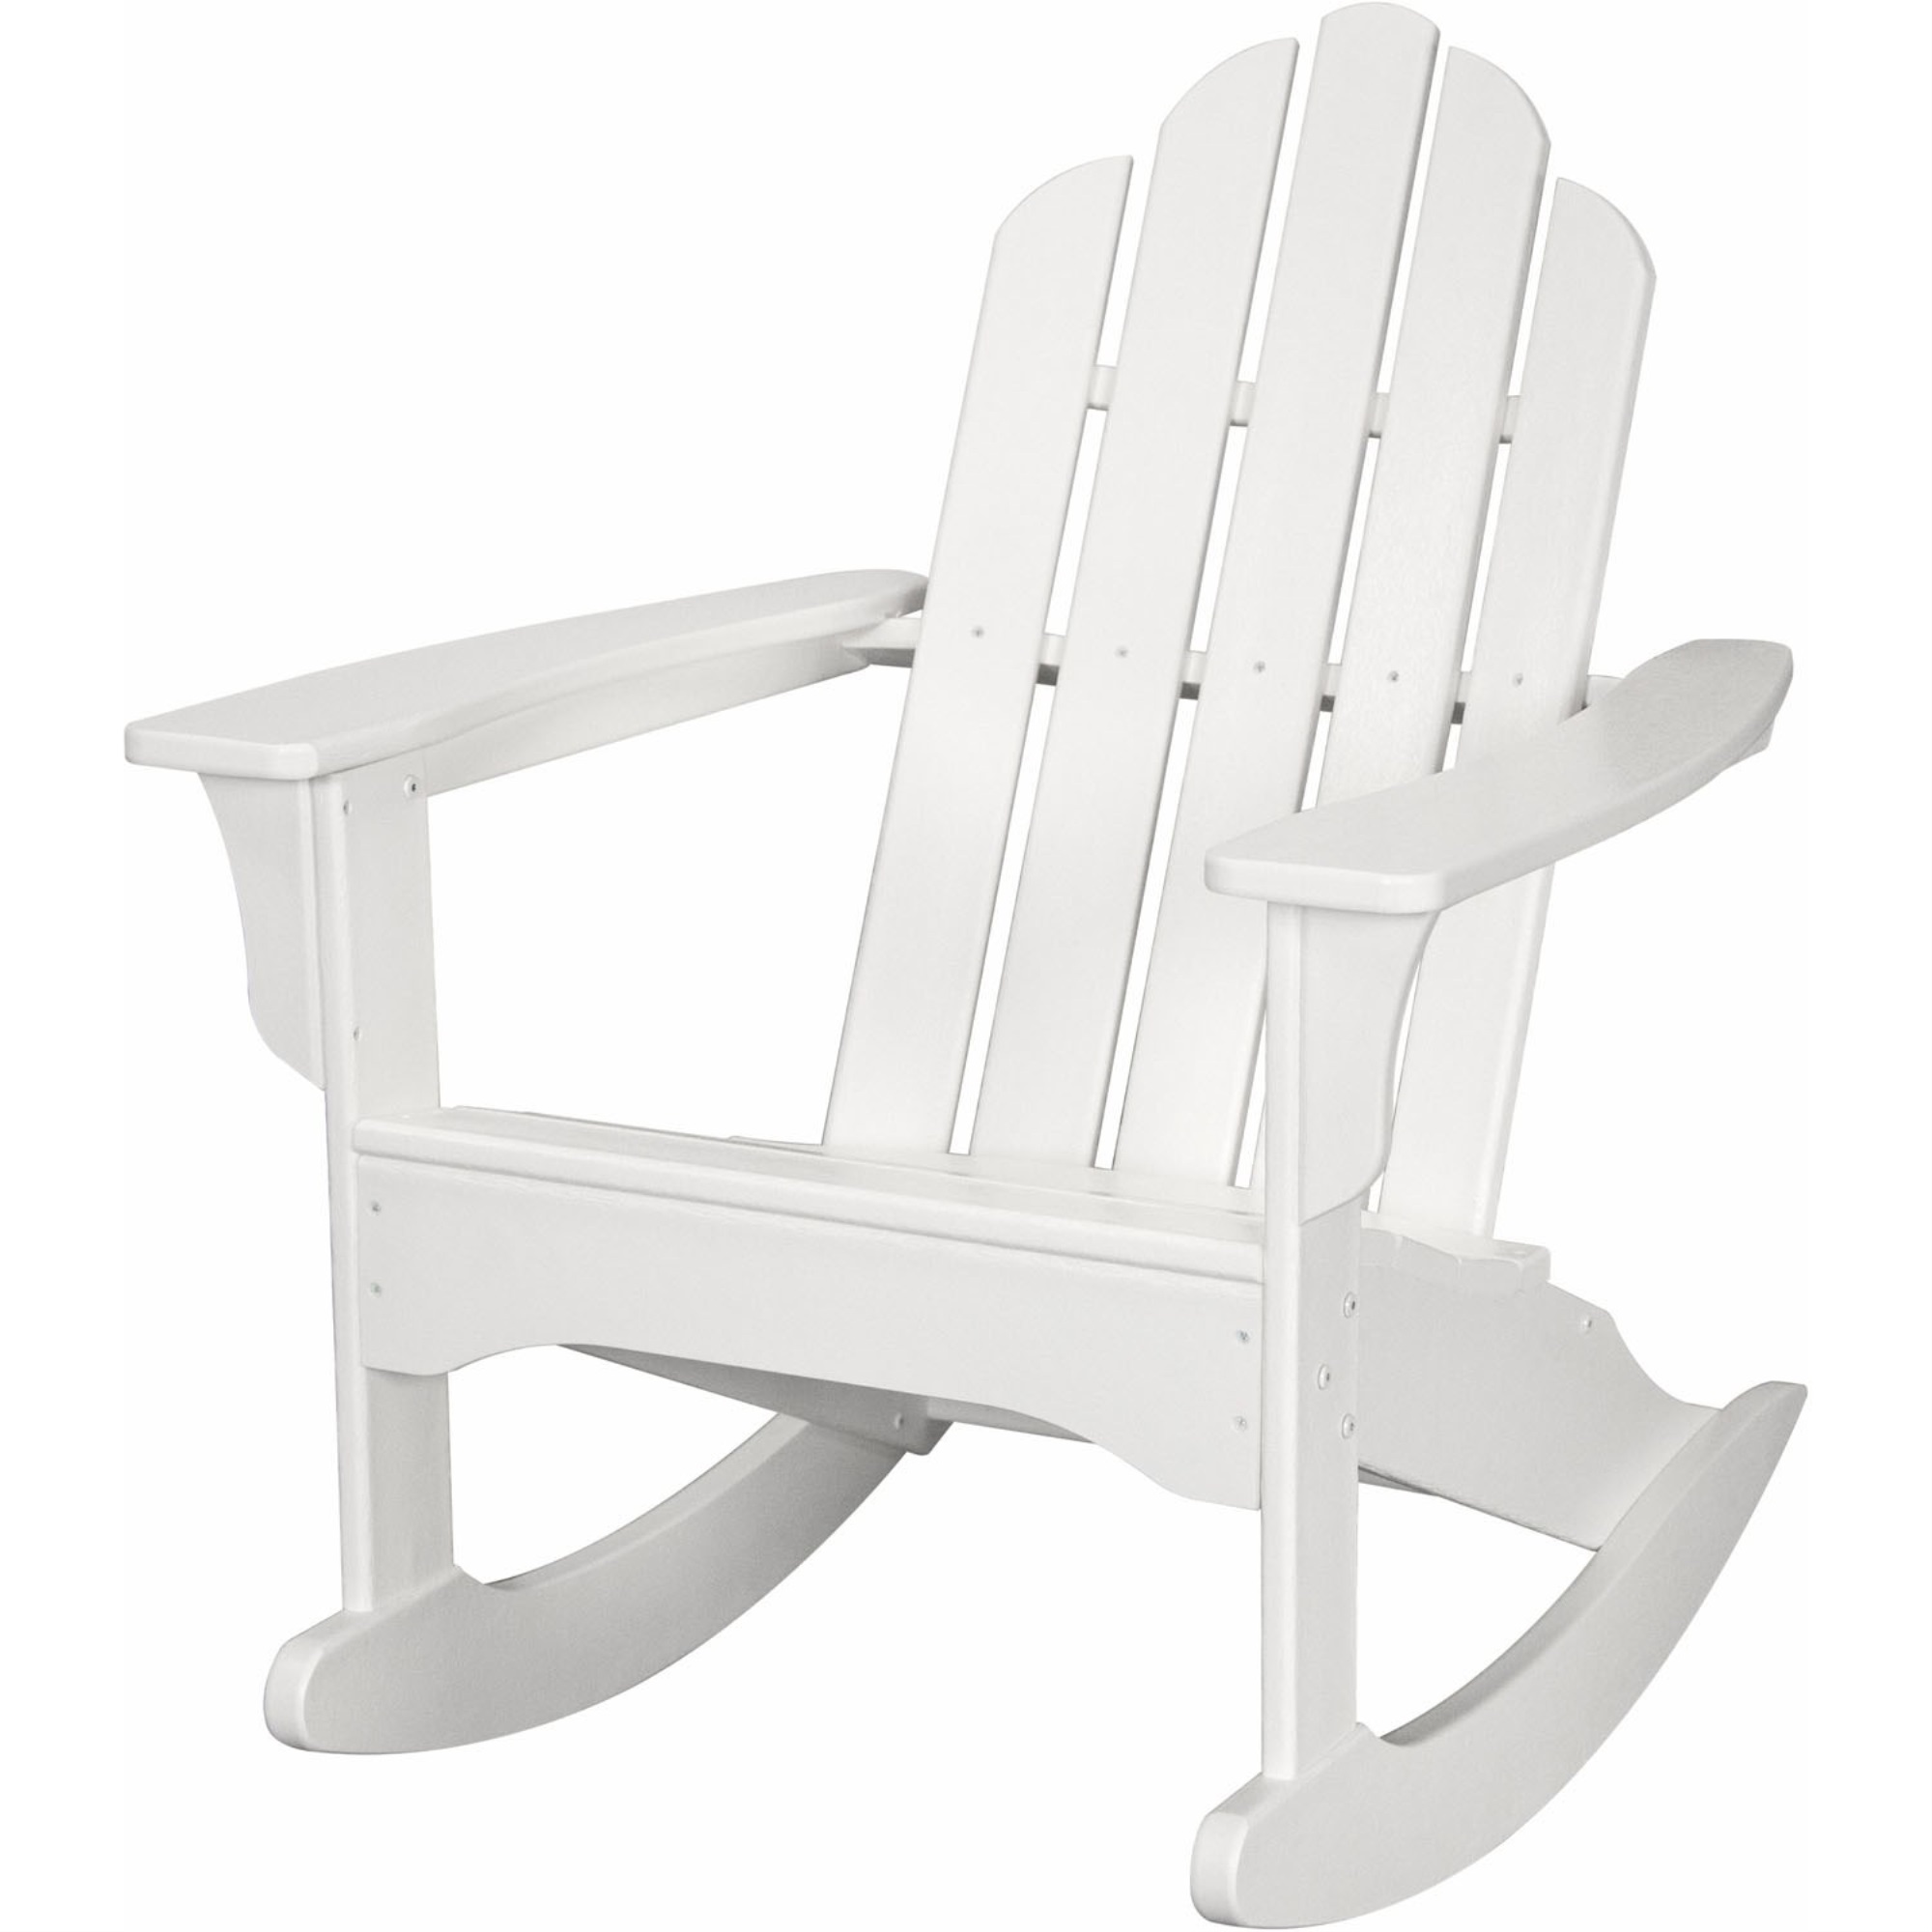 Hanover All-Weather Adirondack Rocking Chair in White - image 1 of 2